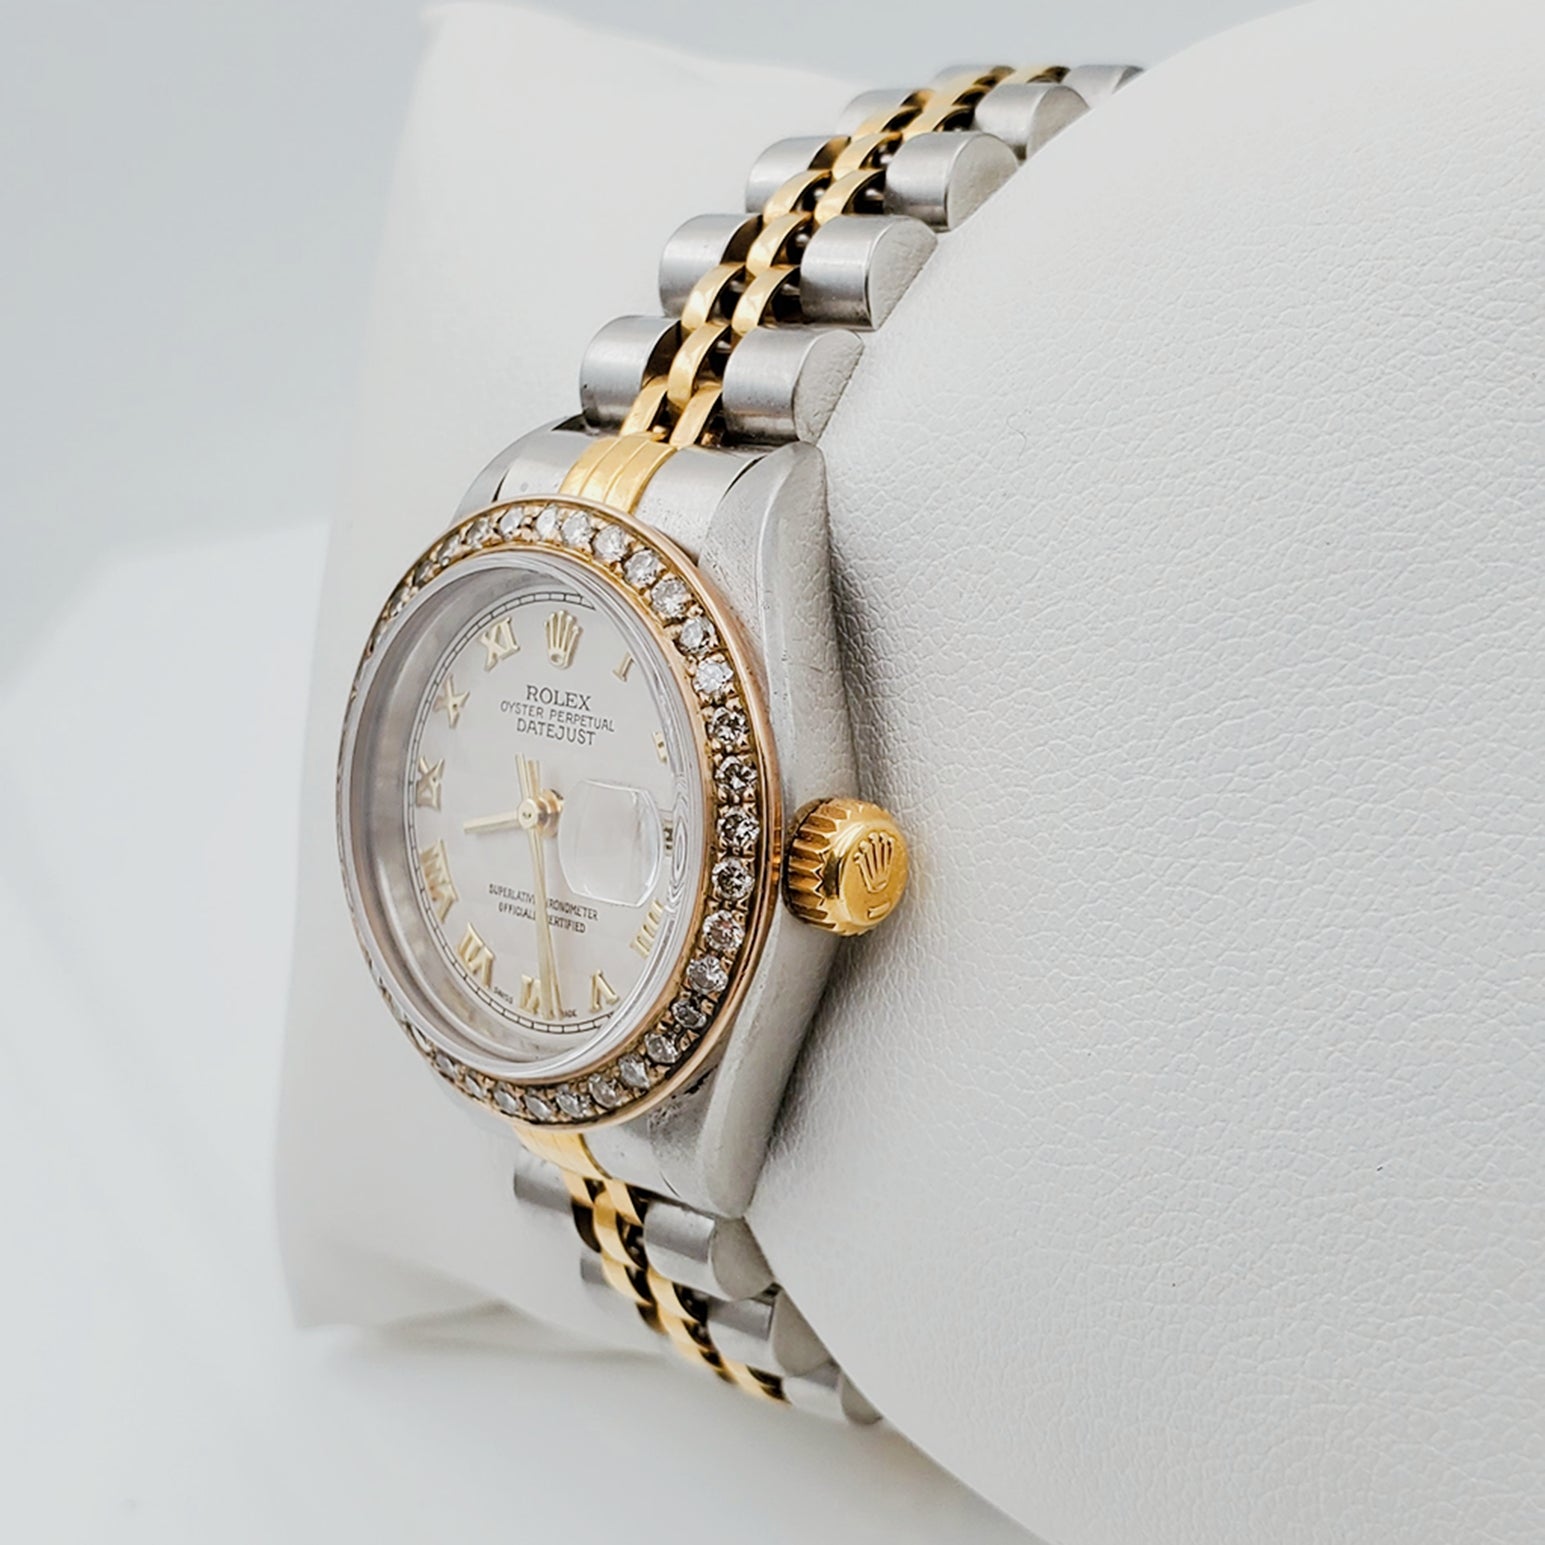 Women's Rolex 18K Gold Two-Tone 26mm DateJust Watch with Roman Numerals, Off-White Dial and Diamond Bezel. (Pre-Owned)